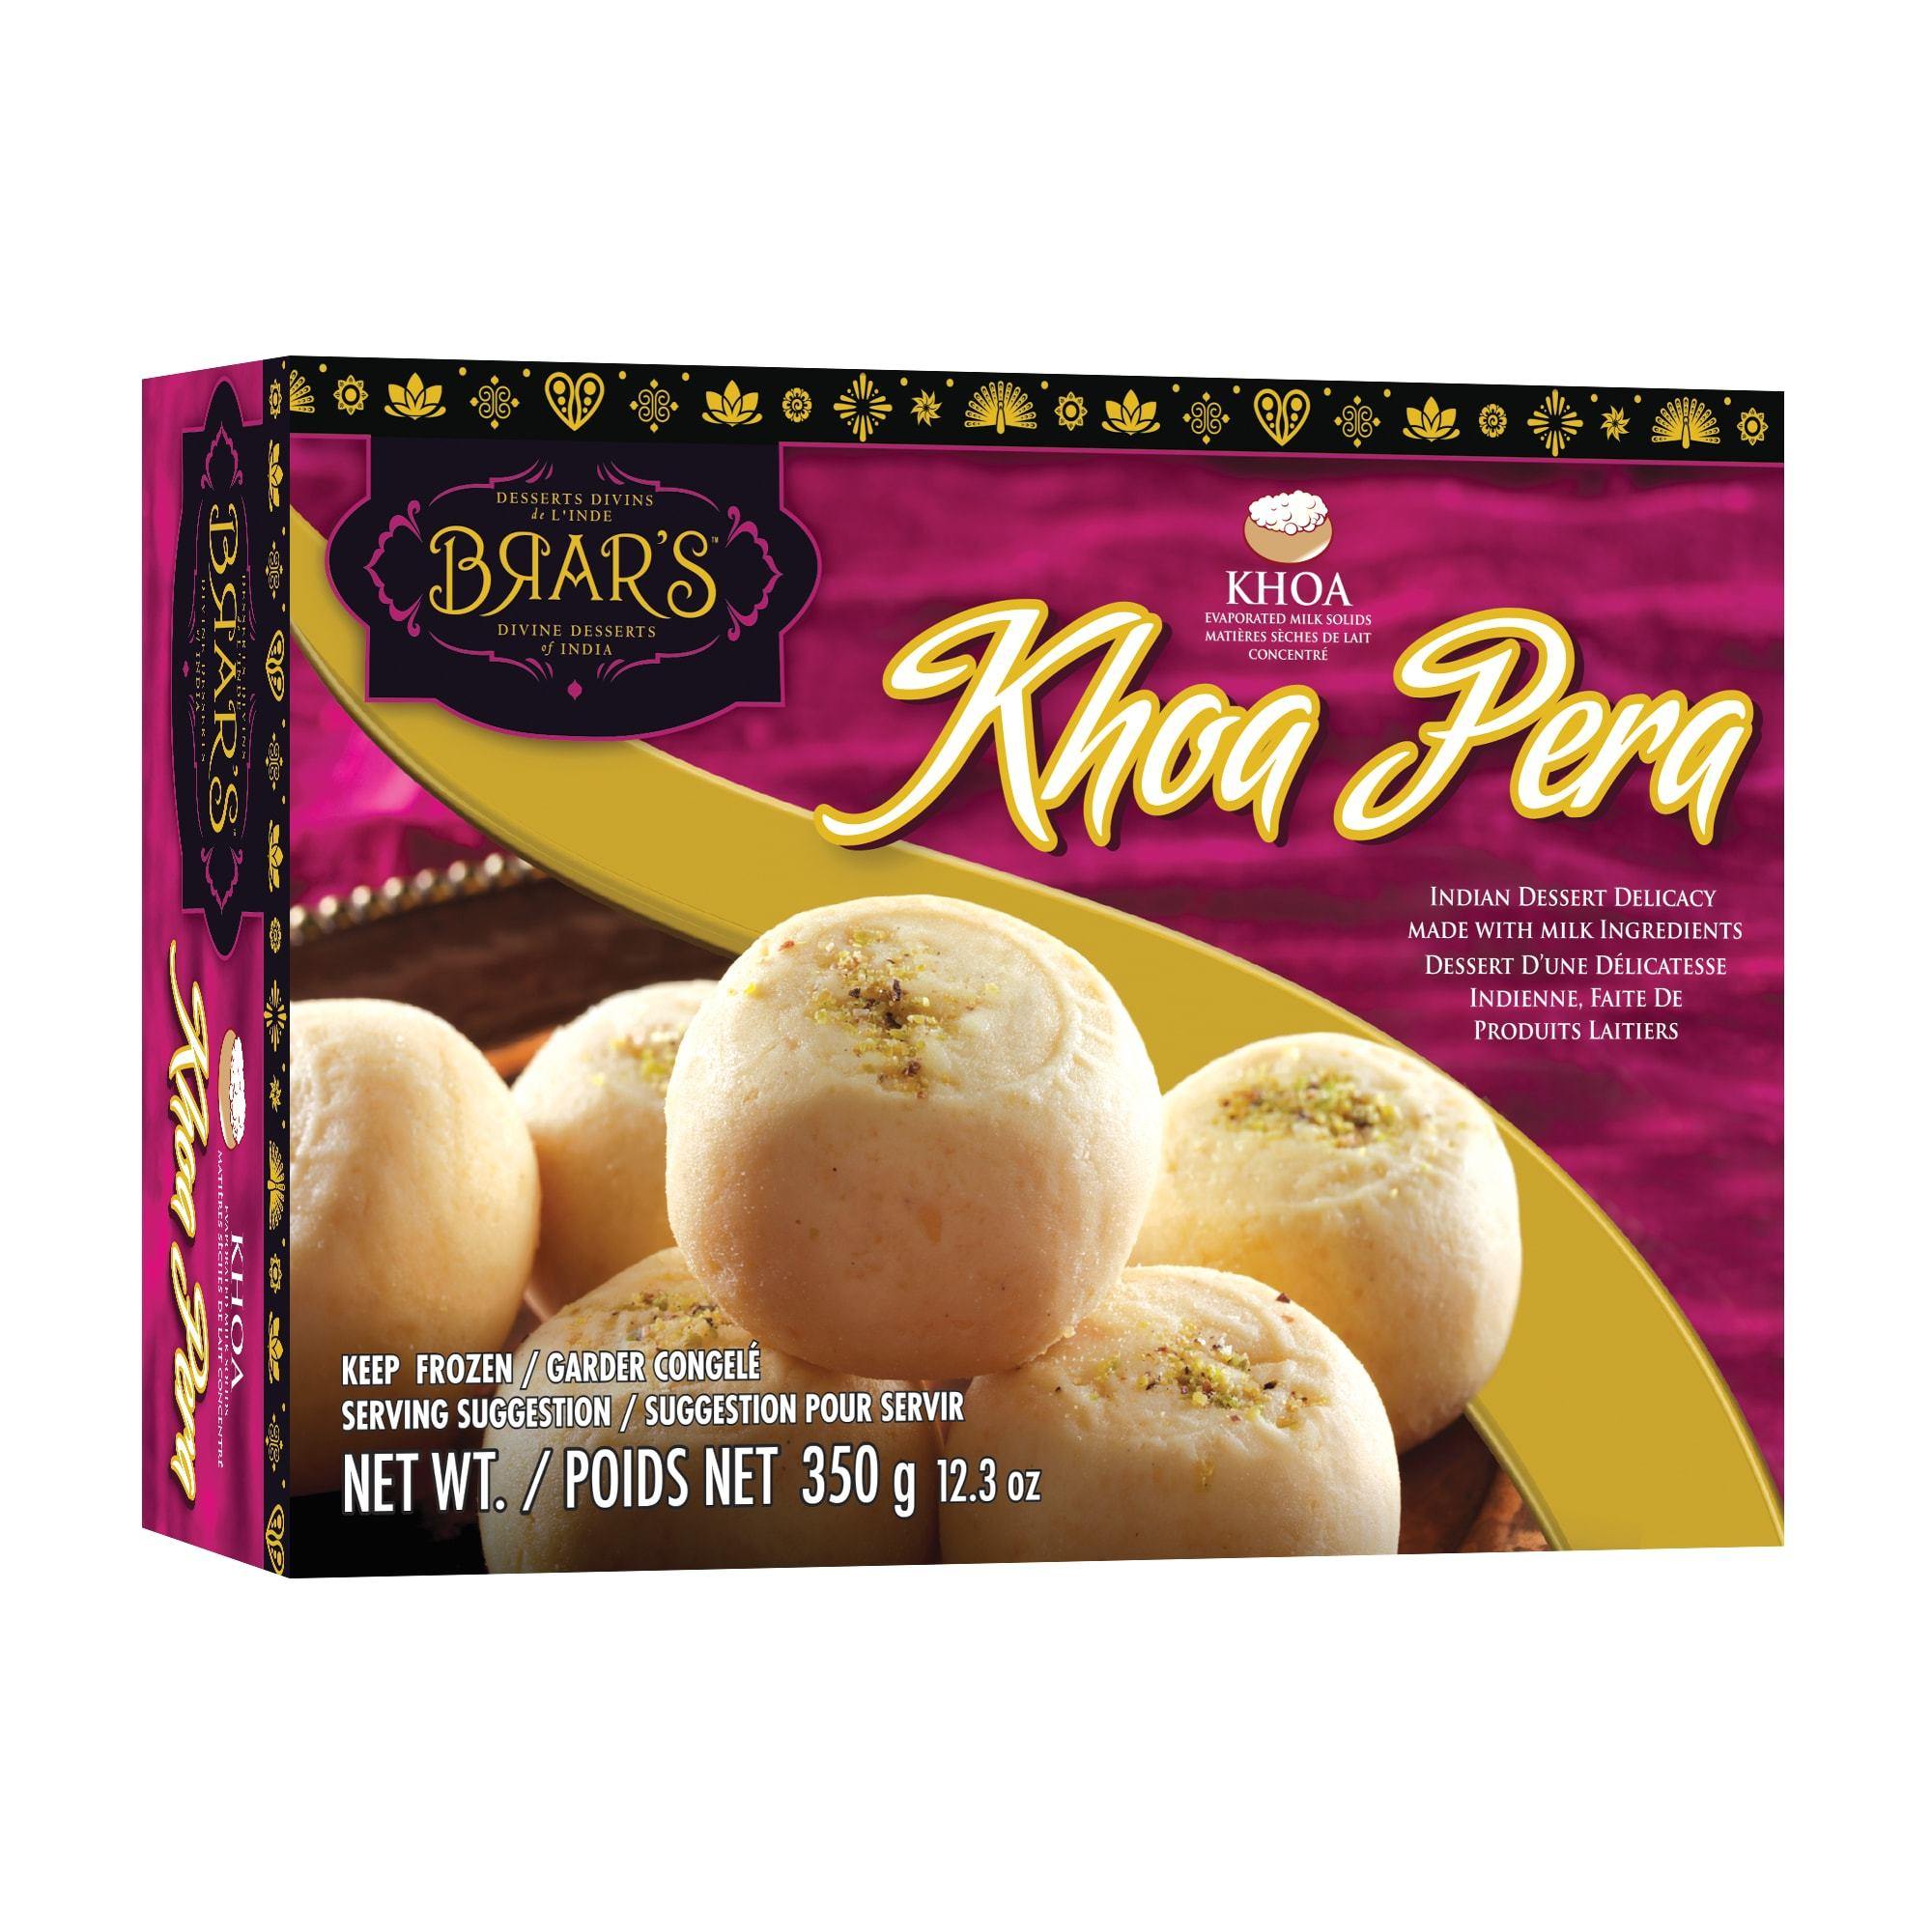 Khoa pera - Indian Grocery Store - Cartly